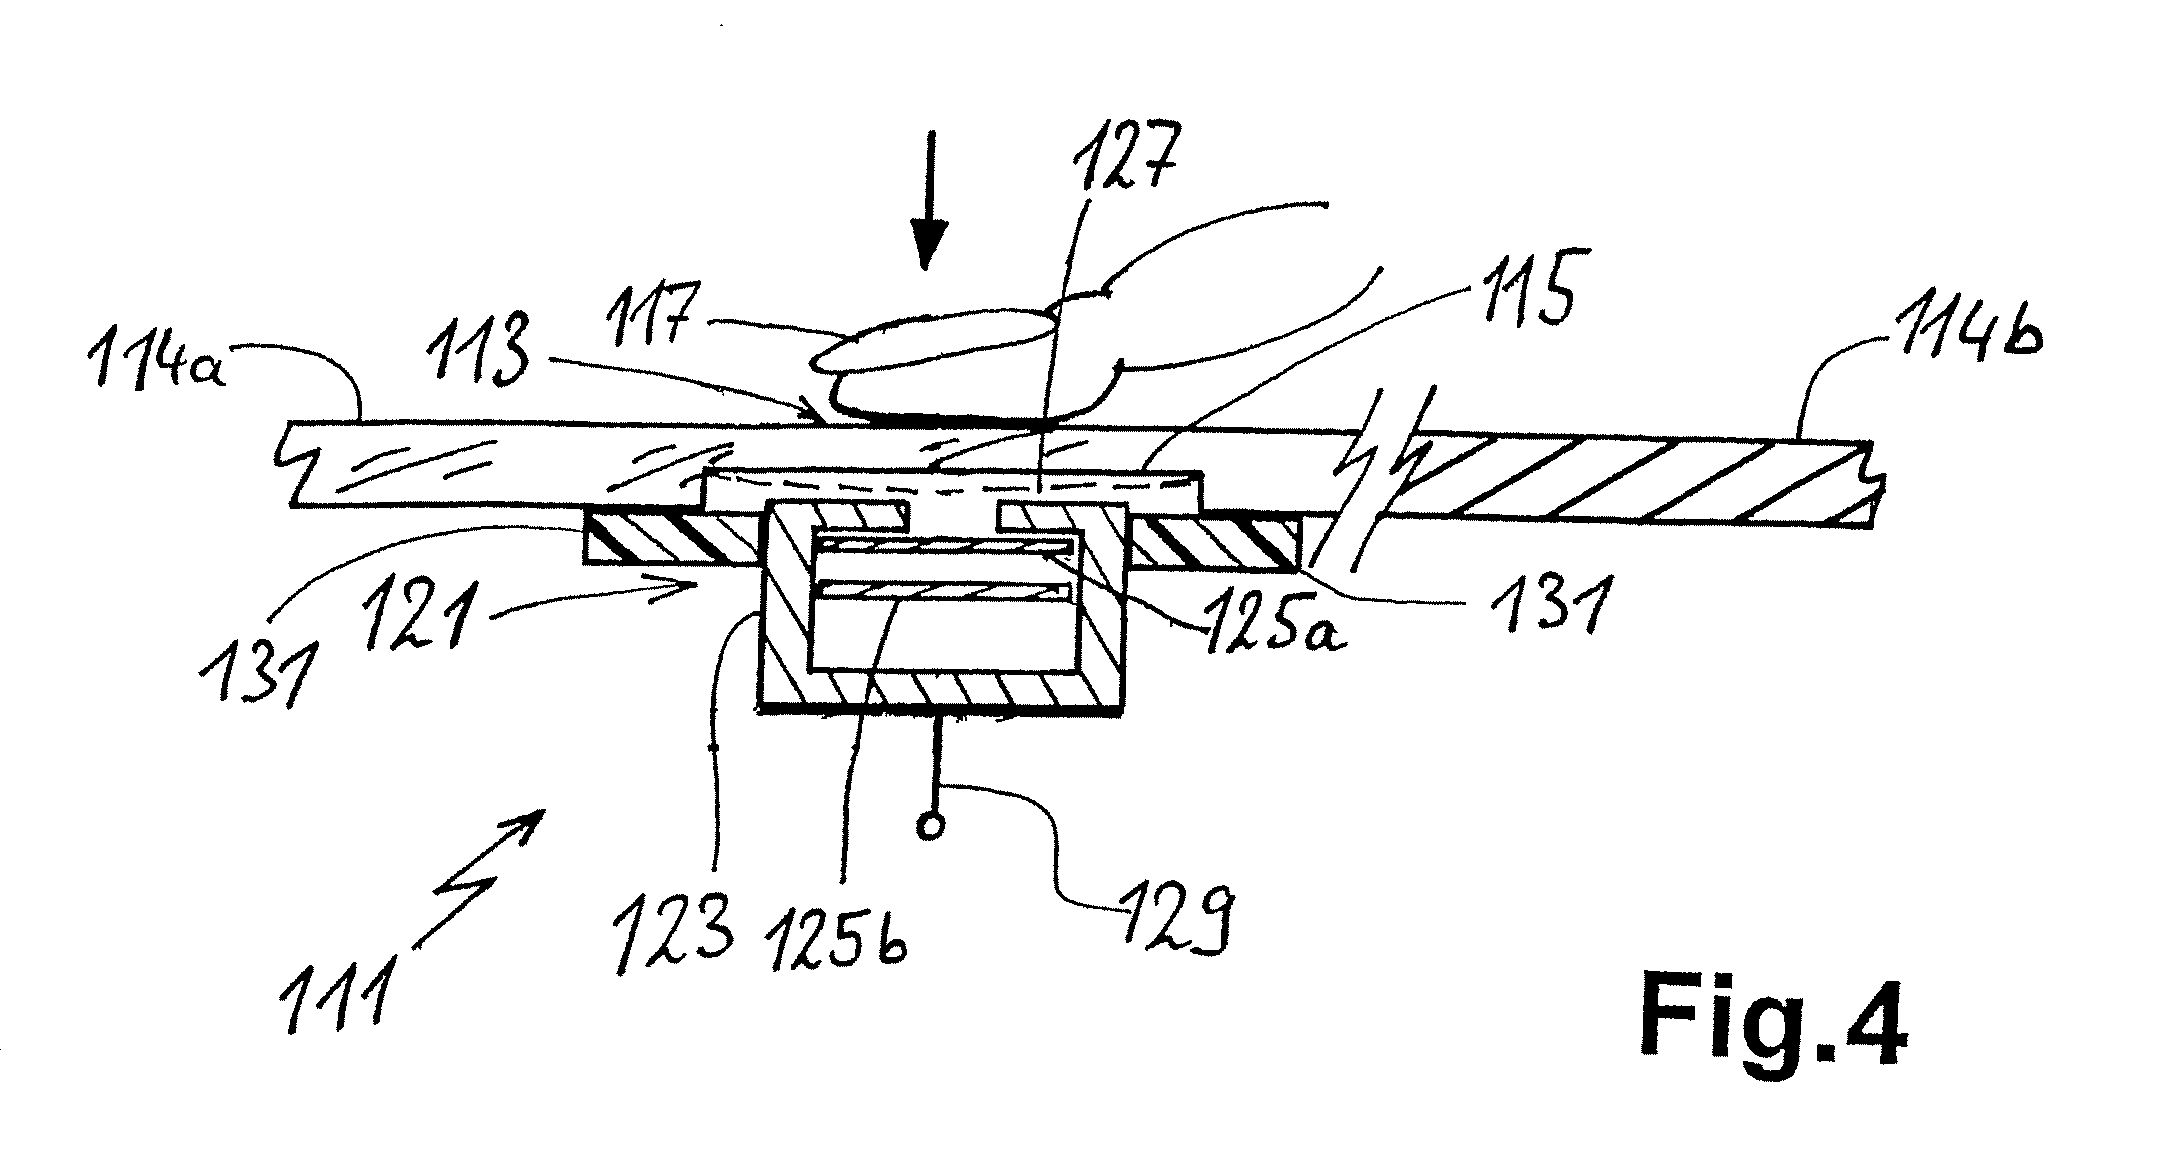 Operating device with an operating field and a sensor element for an electrical appliance and method for operating the operating device